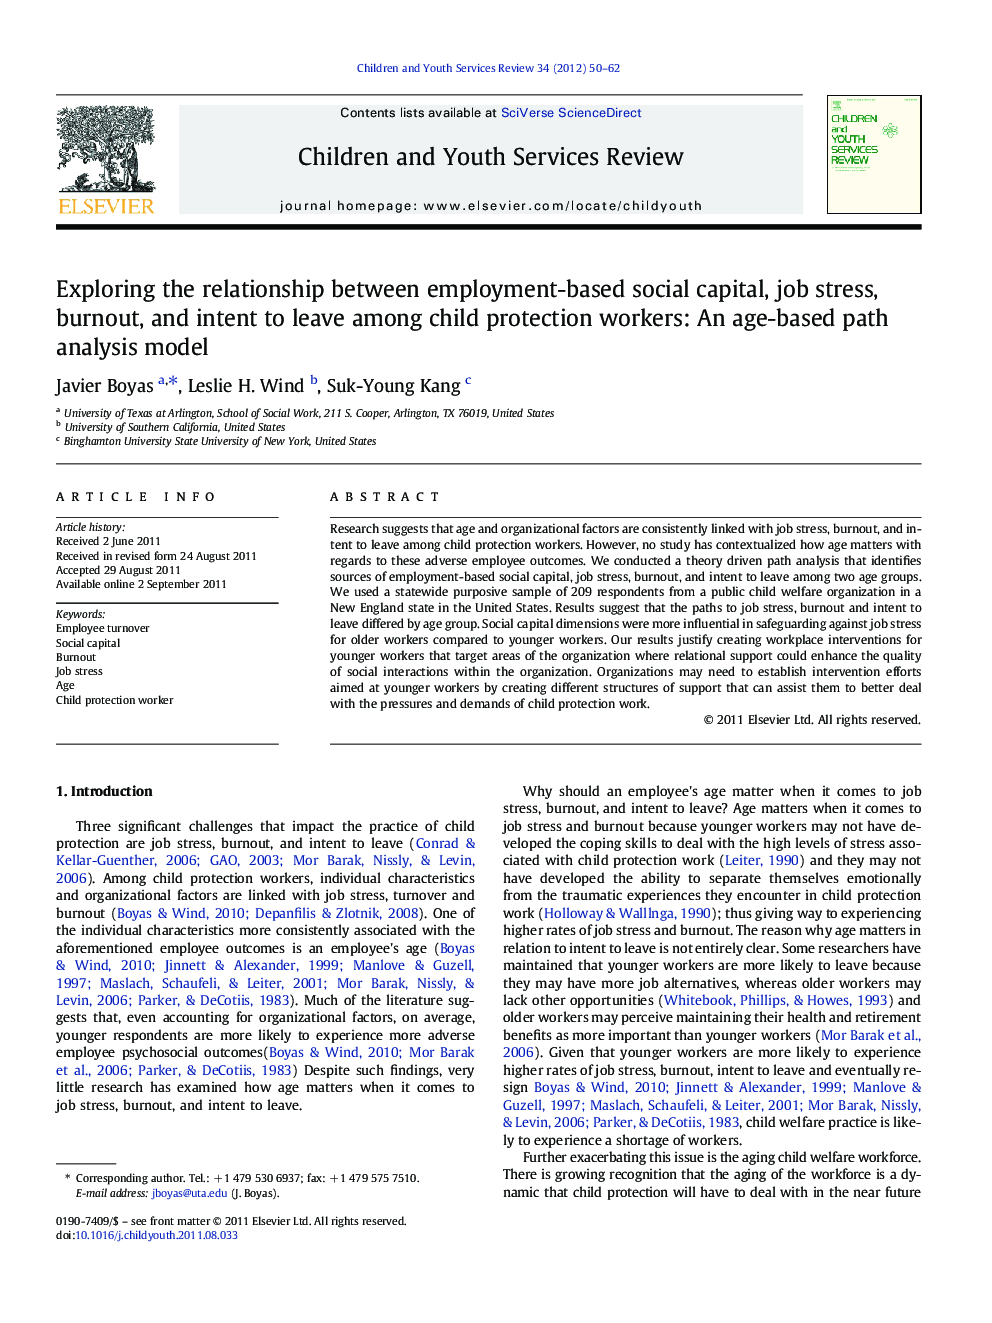 Exploring the relationship between employment-based social capital, job stress, burnout, and intent to leave among child protection workers: An age-based path analysis model